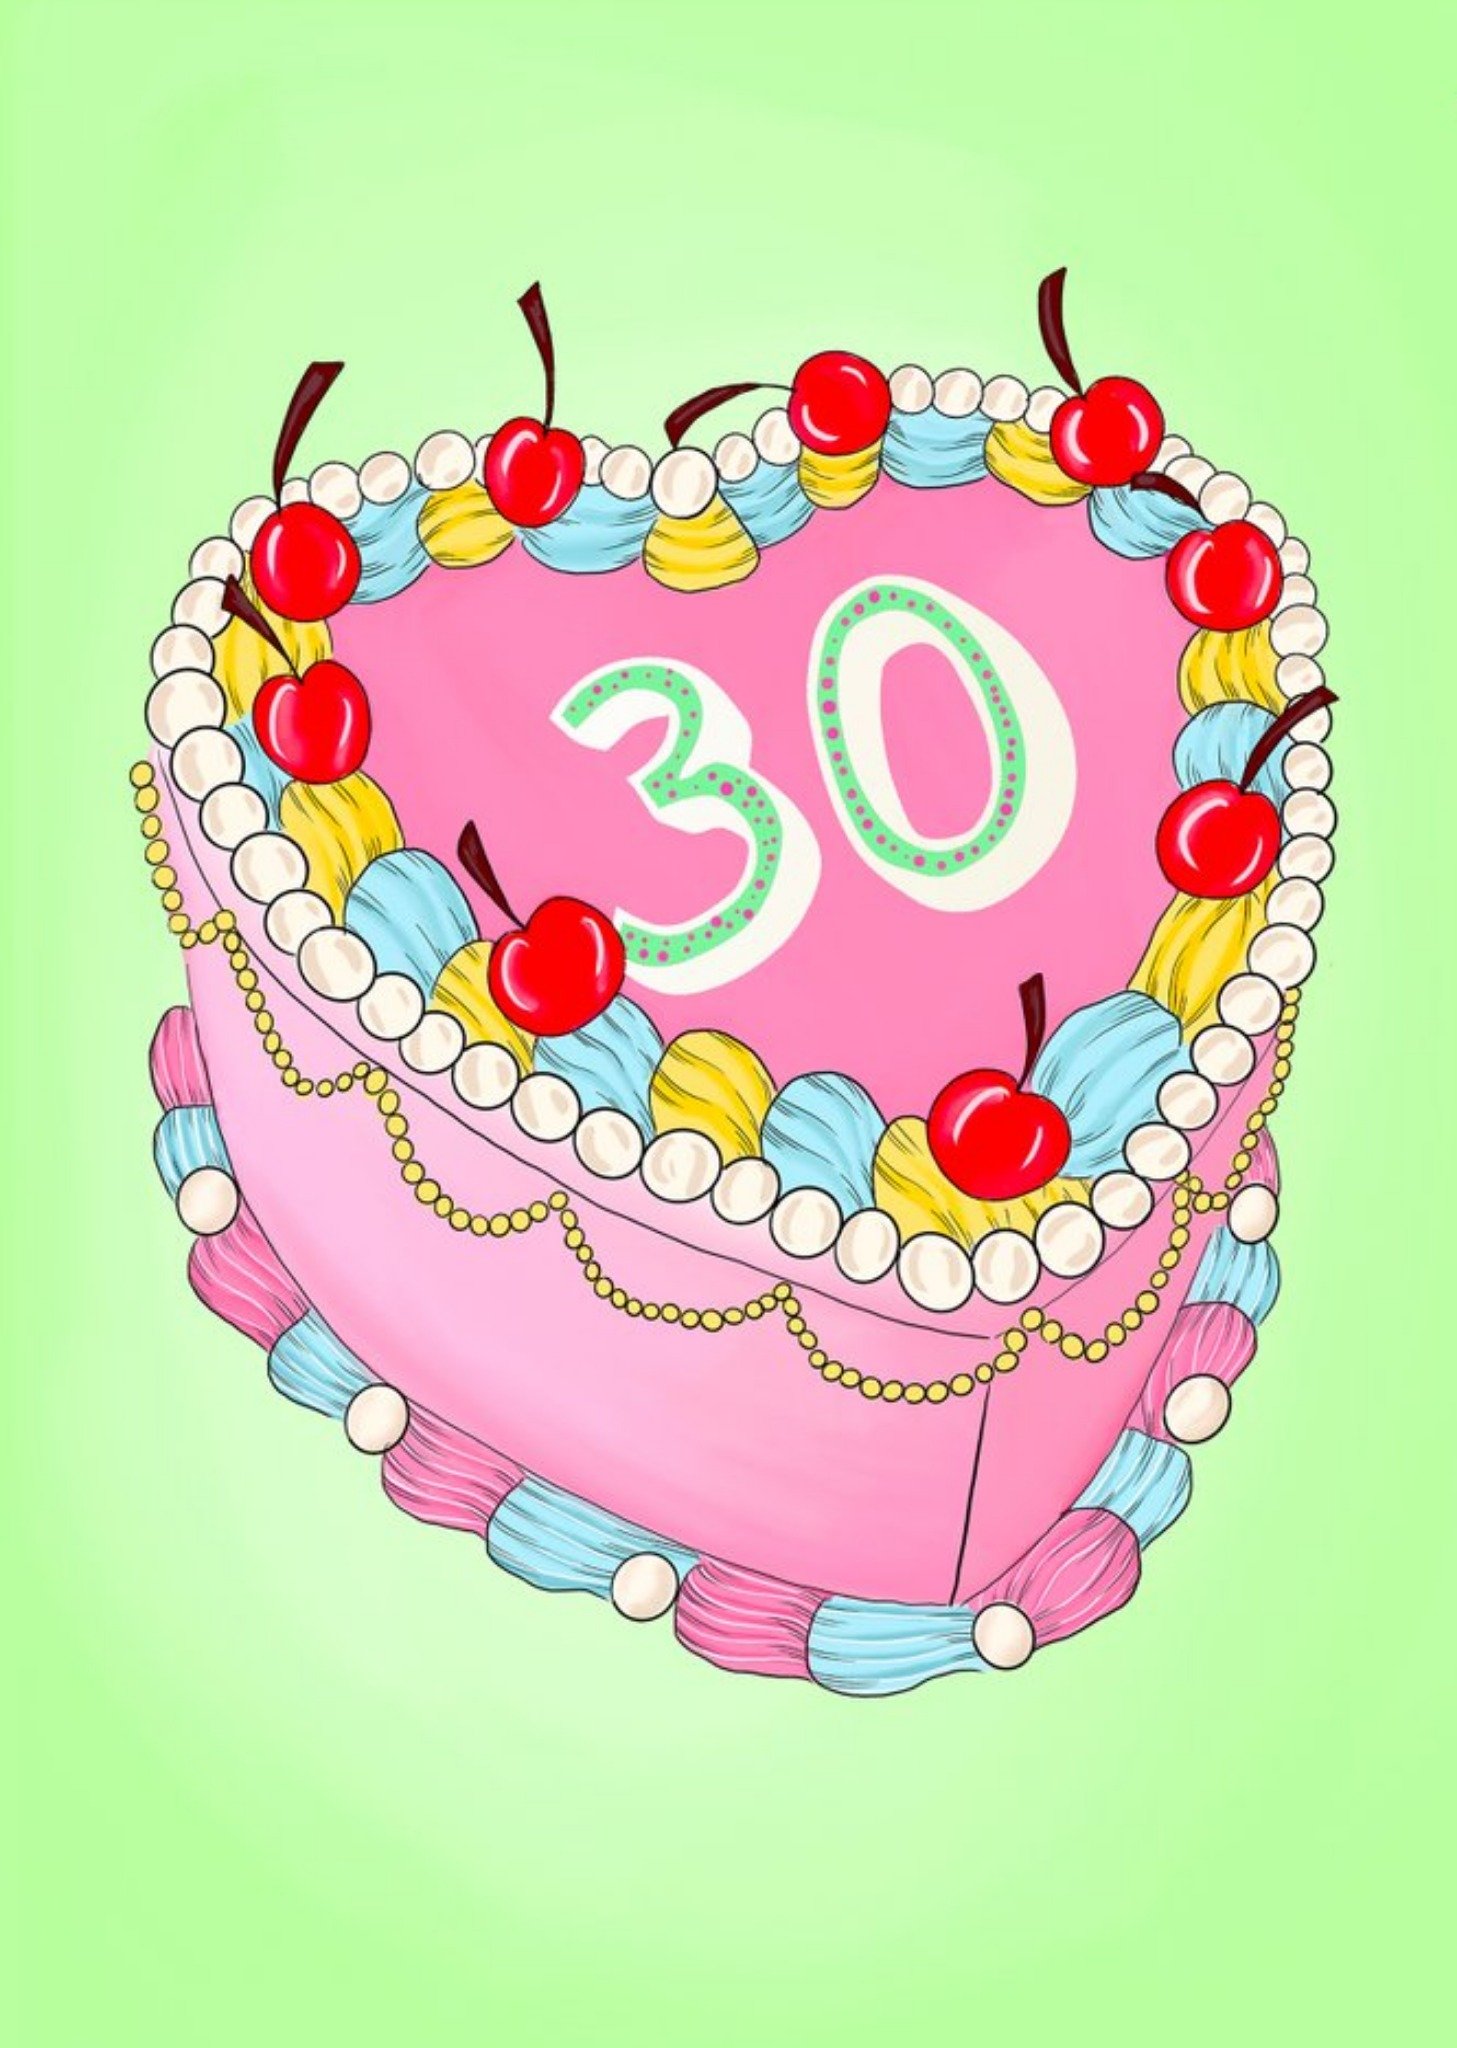 Moonpig Poppy And Mabel Bright Graphic Illustration Of A 30th Birthday Cake Card, Large